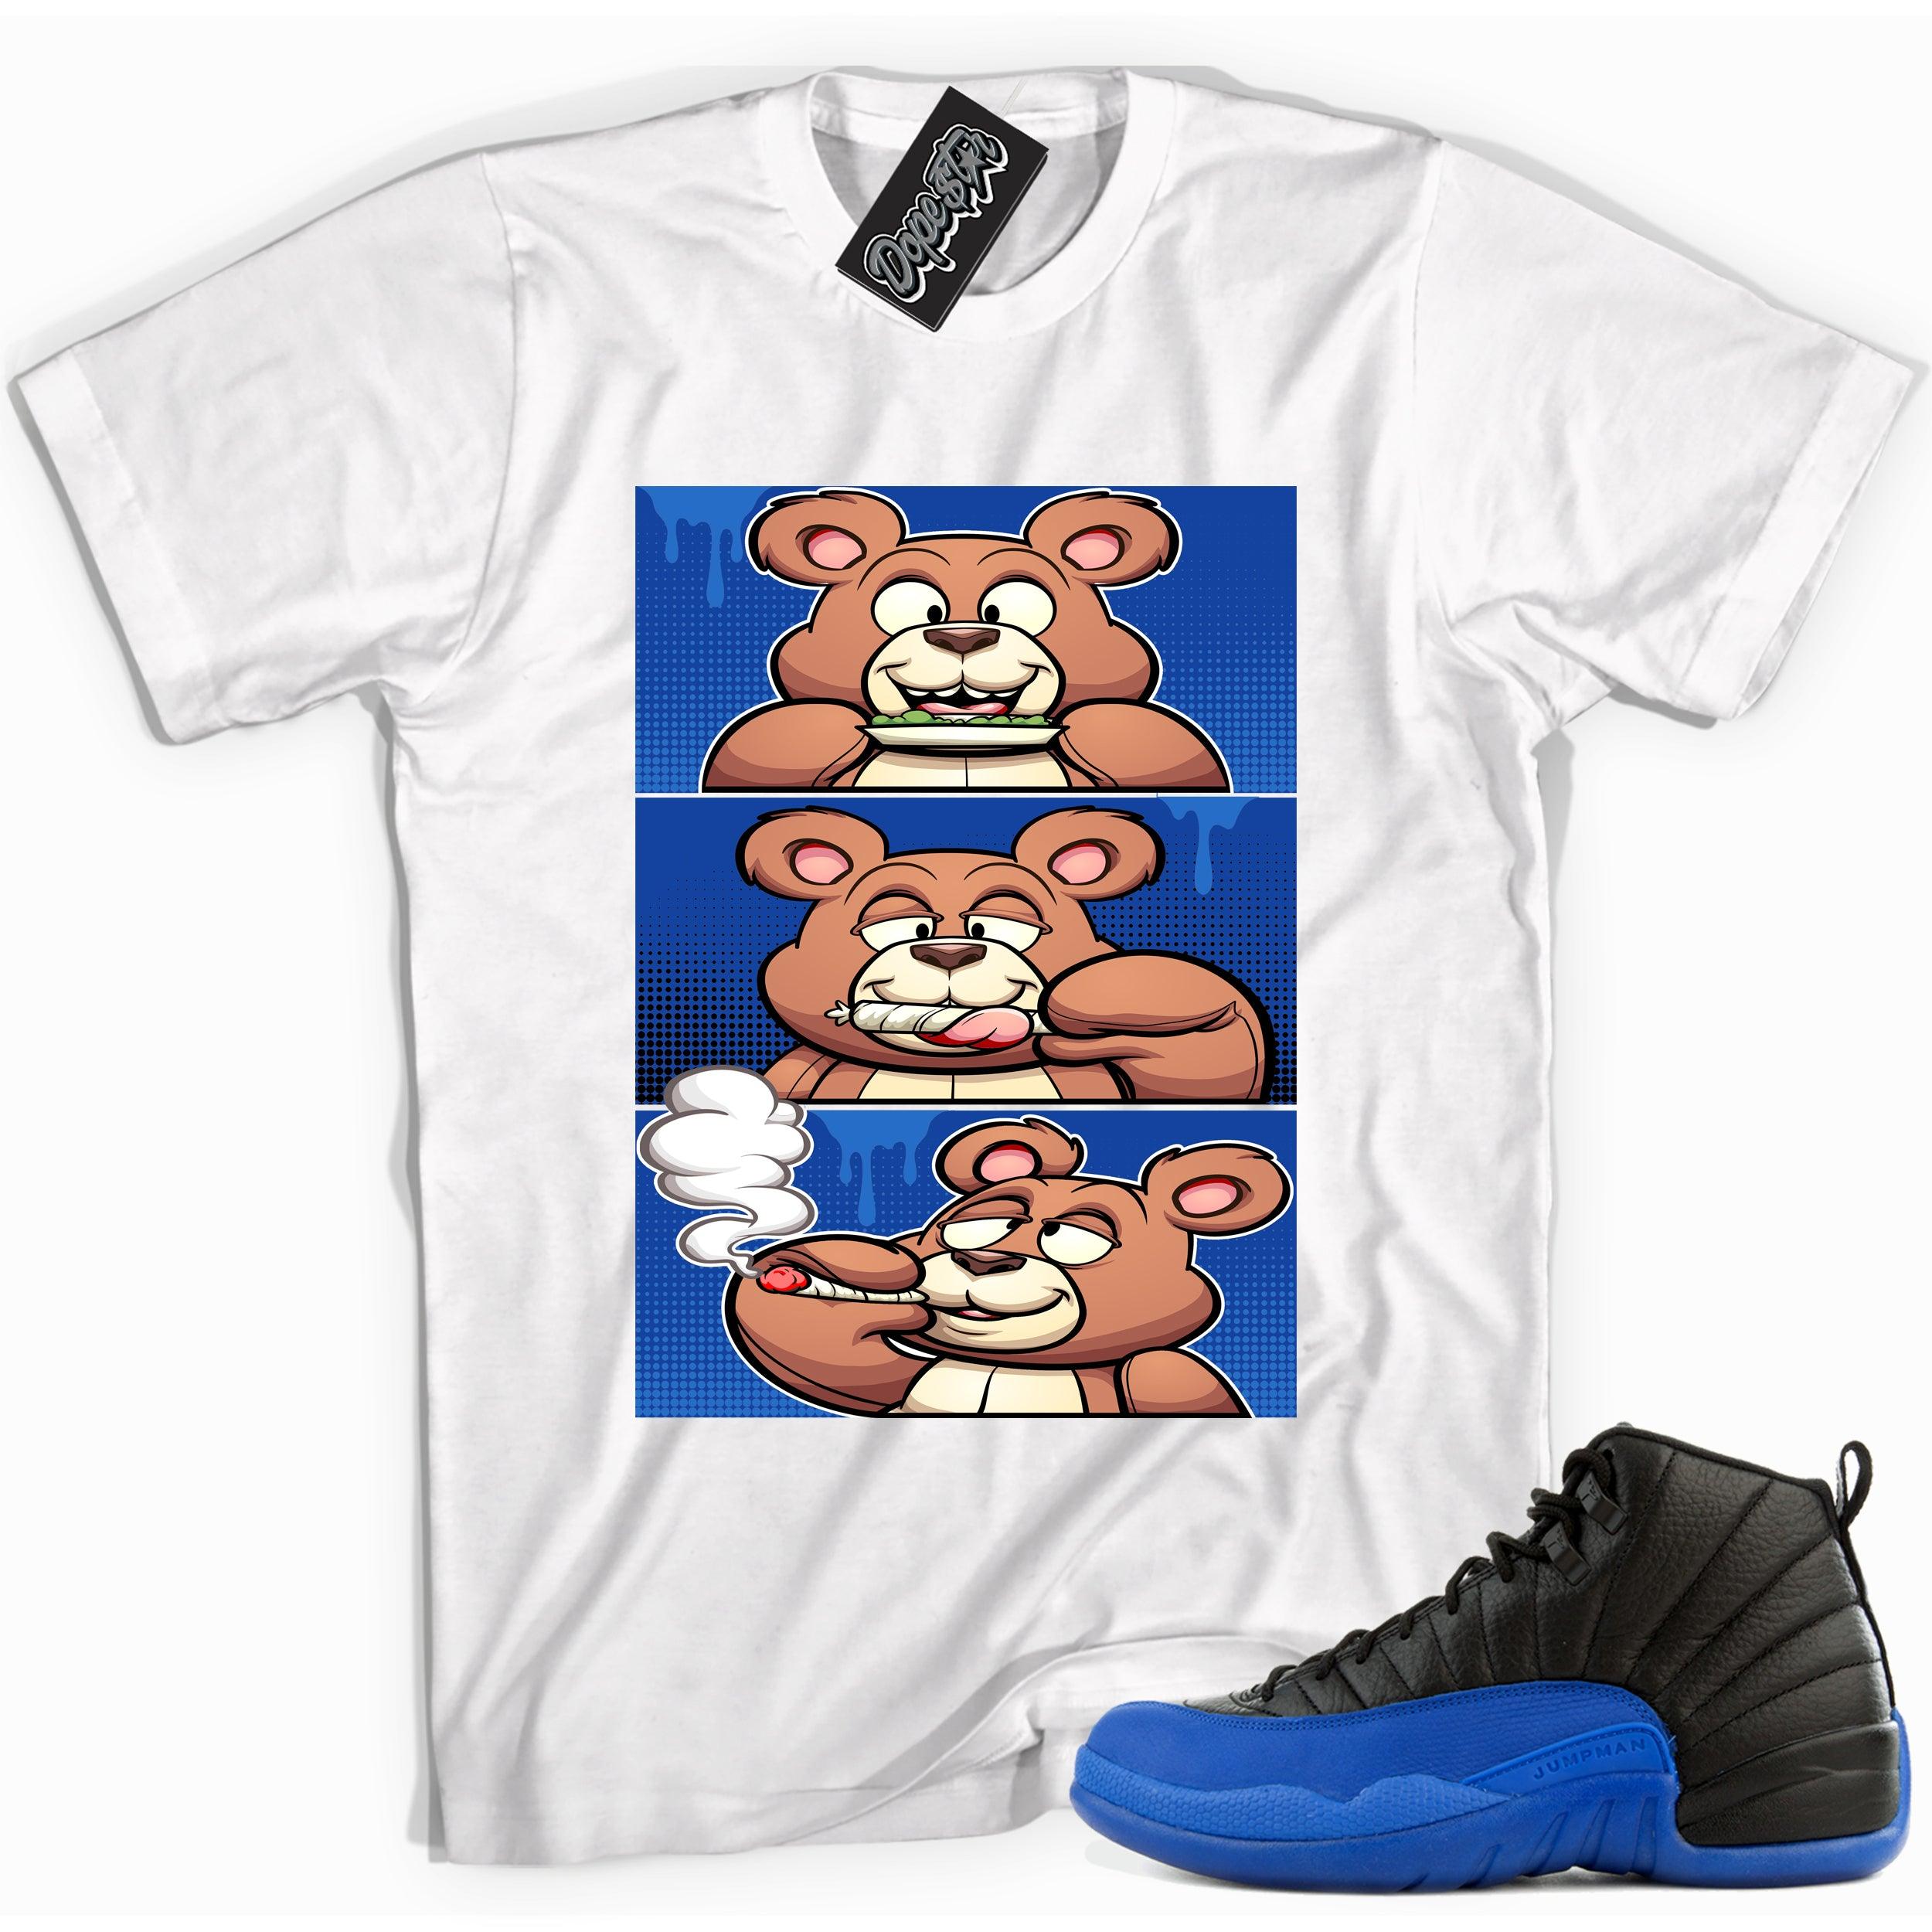 Cool white graphic tee with 'roll it lick it smoke it bear' print, that perfectly matches Air Jordan 12 Retro Black Game Royal sneakers.